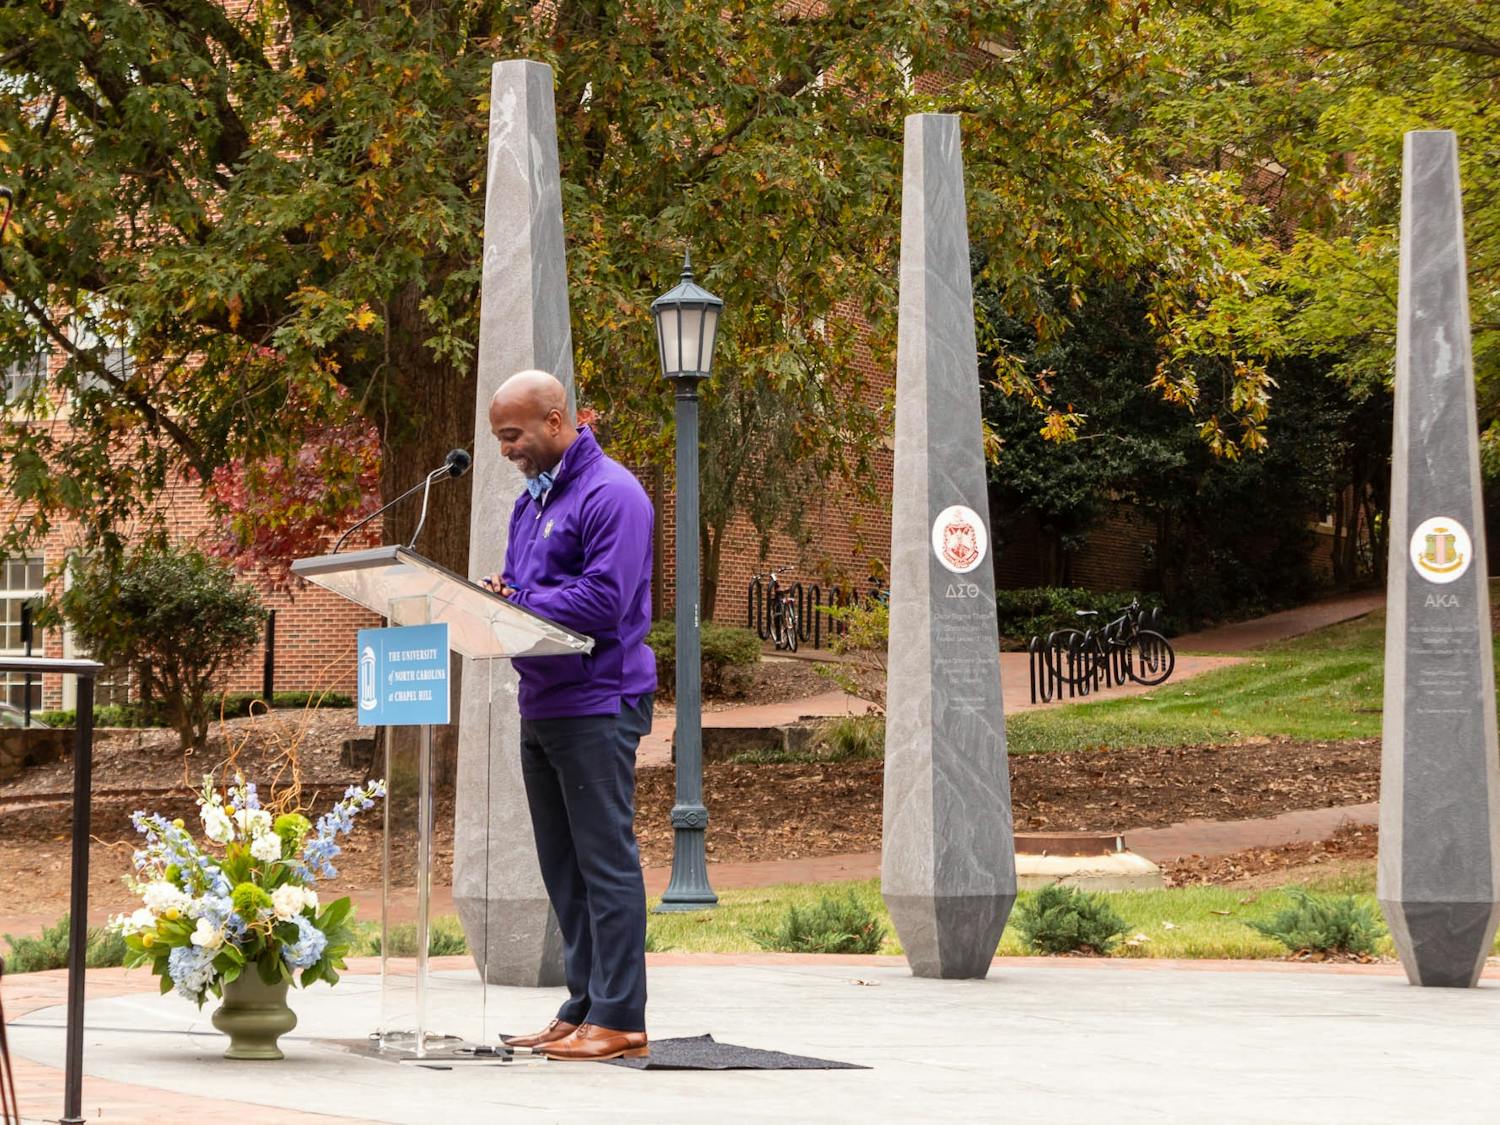 Zack Hawkins, the director of development for UNC Student Affairs, provides welcoming remarks to the dozens of people gathered in celebration of the opening of the NPHC Legacy Plaza on UNC's campus. The plaza represents the University's nine historically Black fraternities and sororities for their contributions to the campus community.